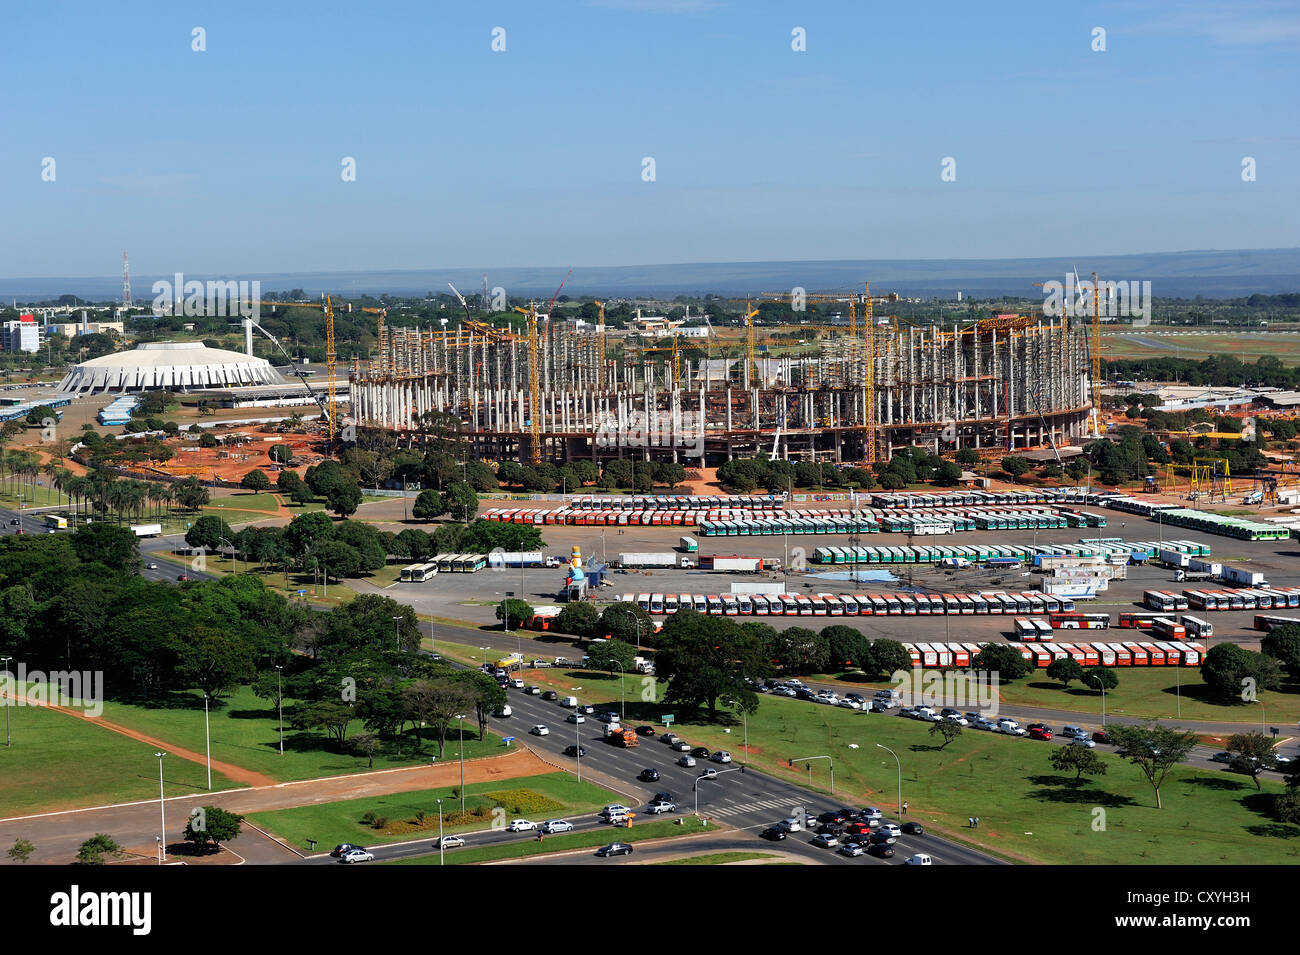 Construction site of the football stadium for the Football World Cup 2014, Brasilia, Distrito Federal DF, Brazil, South America Stock Photo